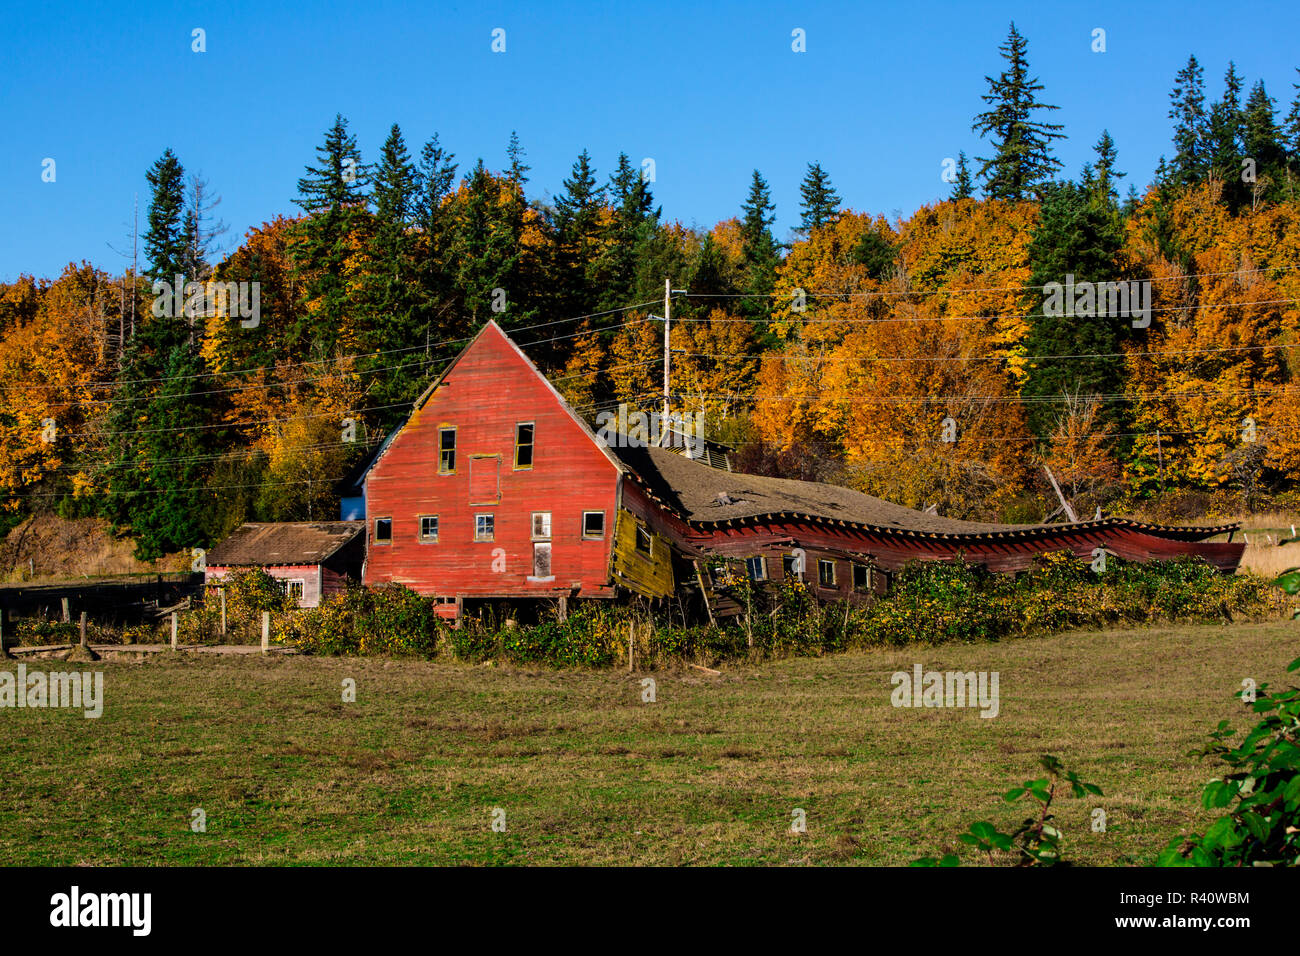 Chimacum, Washington State. Bucolic rickety red barn and copper autumn trees in a pasture Stock Photo